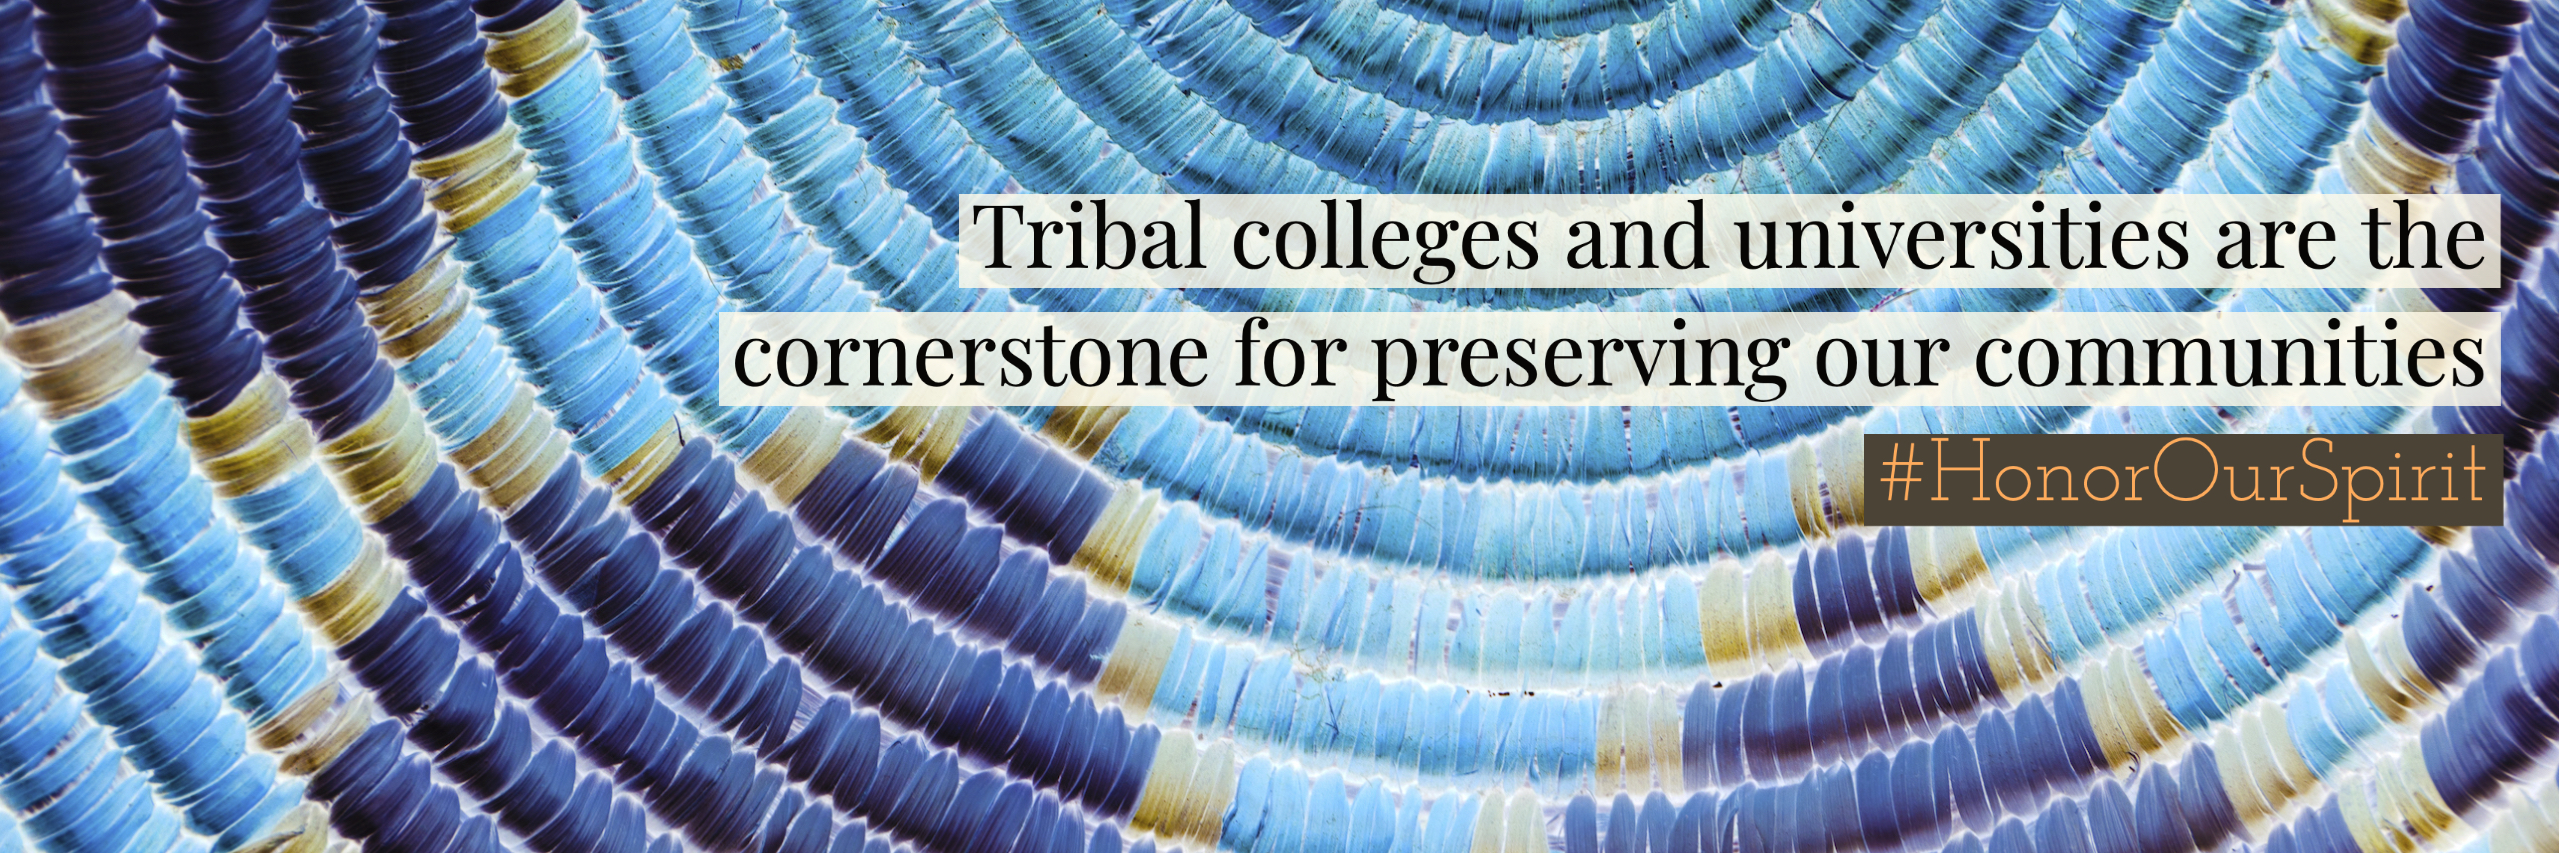 blue patterend basket with text "Tribal colleges and Universities are the cornerstone for preserving our communities"